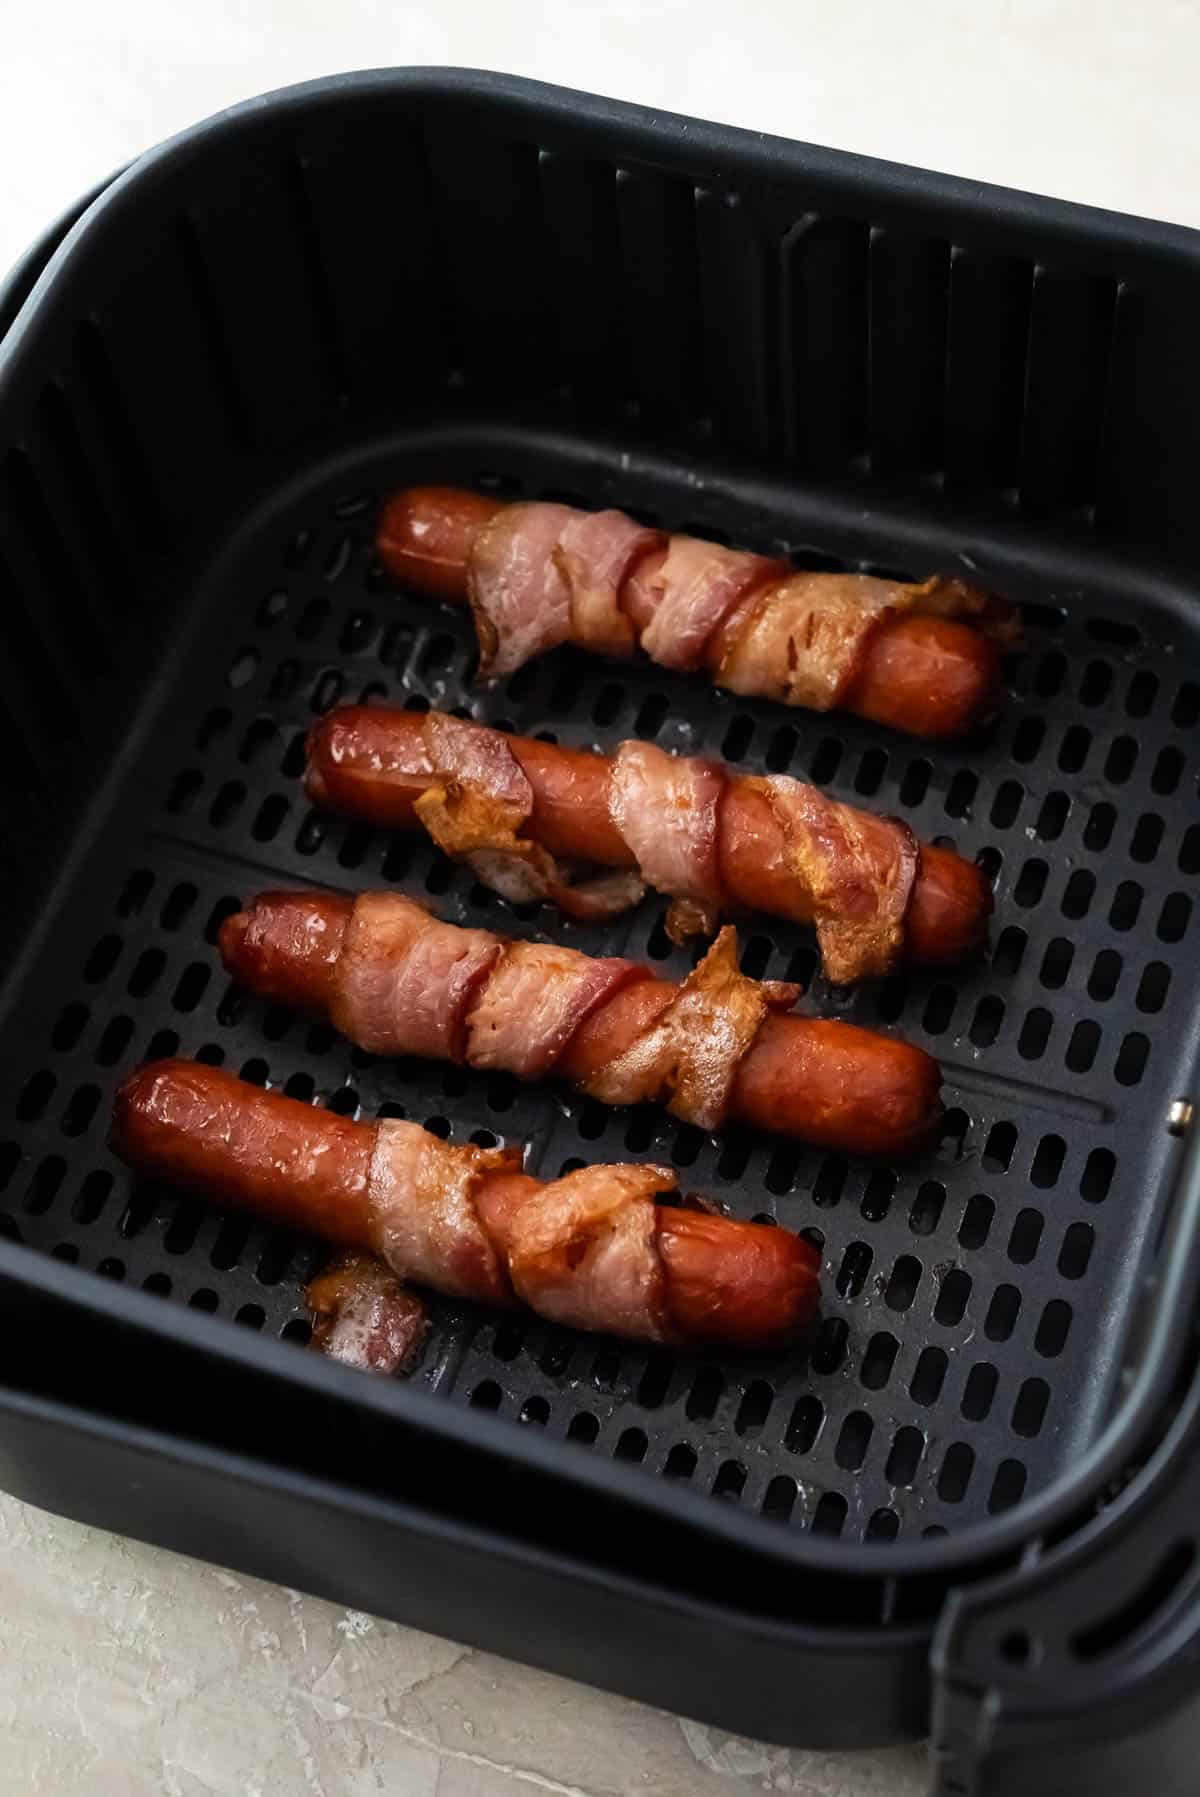 Four bacon wrapped hot dogs in an air fryer basket.